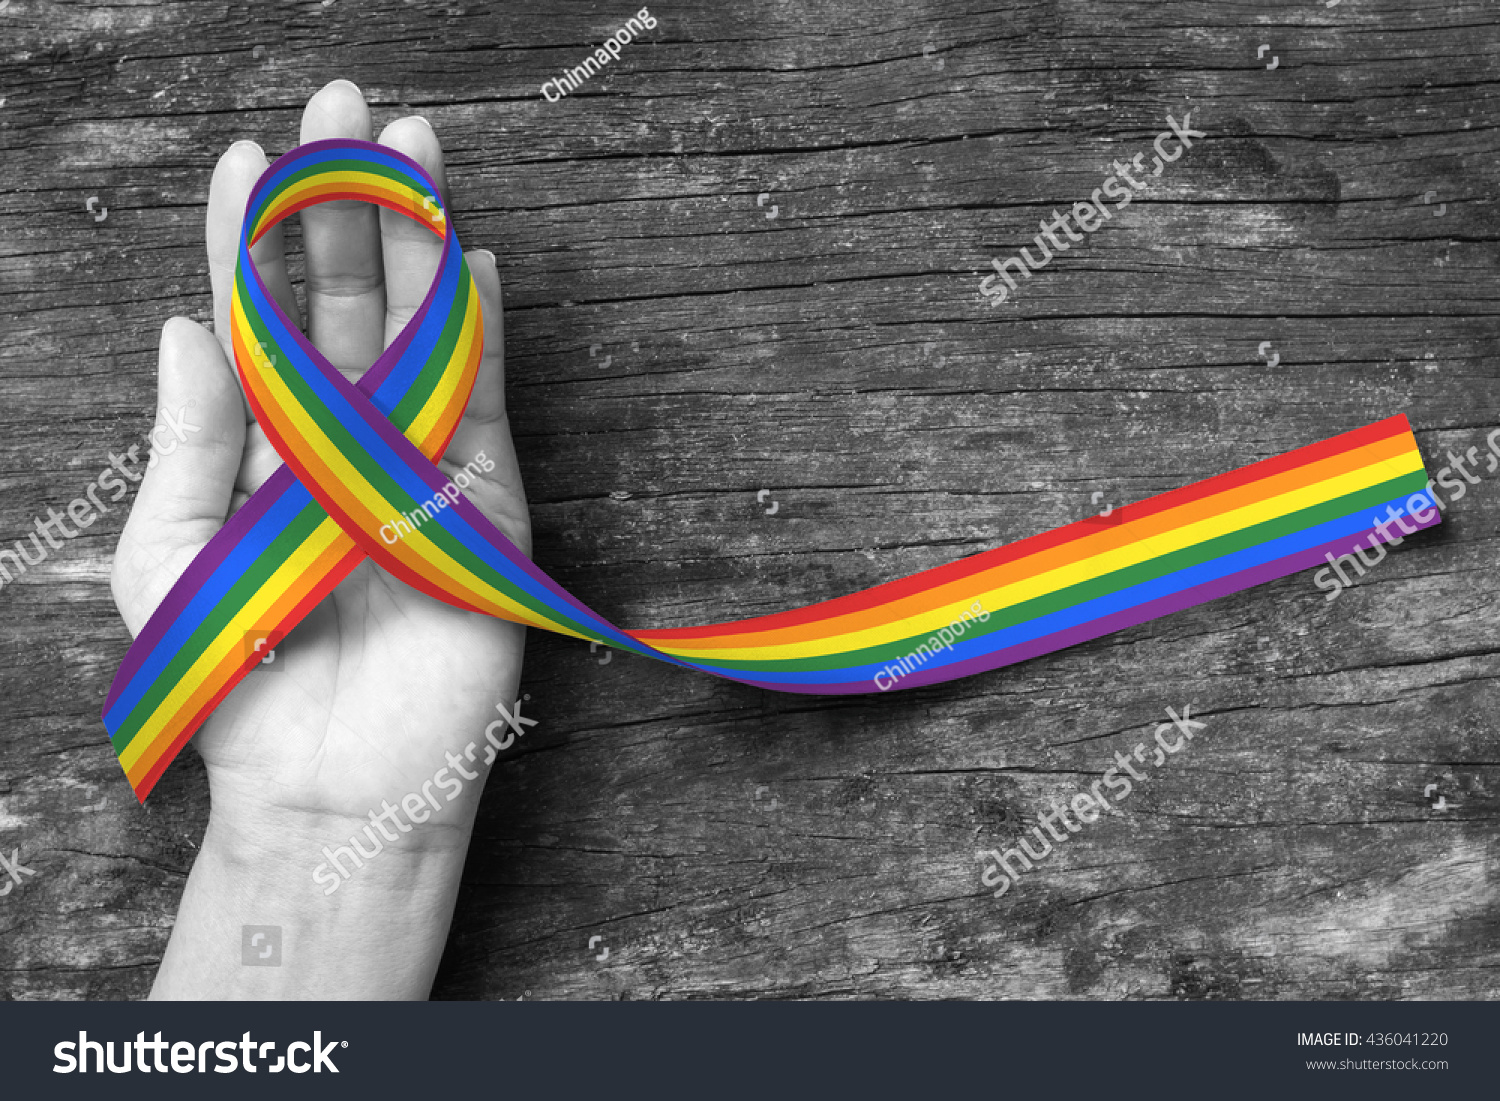 Rainbow color ribbon awareness on human hand with clipping path for Adrenocortical carcinoma and gay pride awareness ribbon #436041220